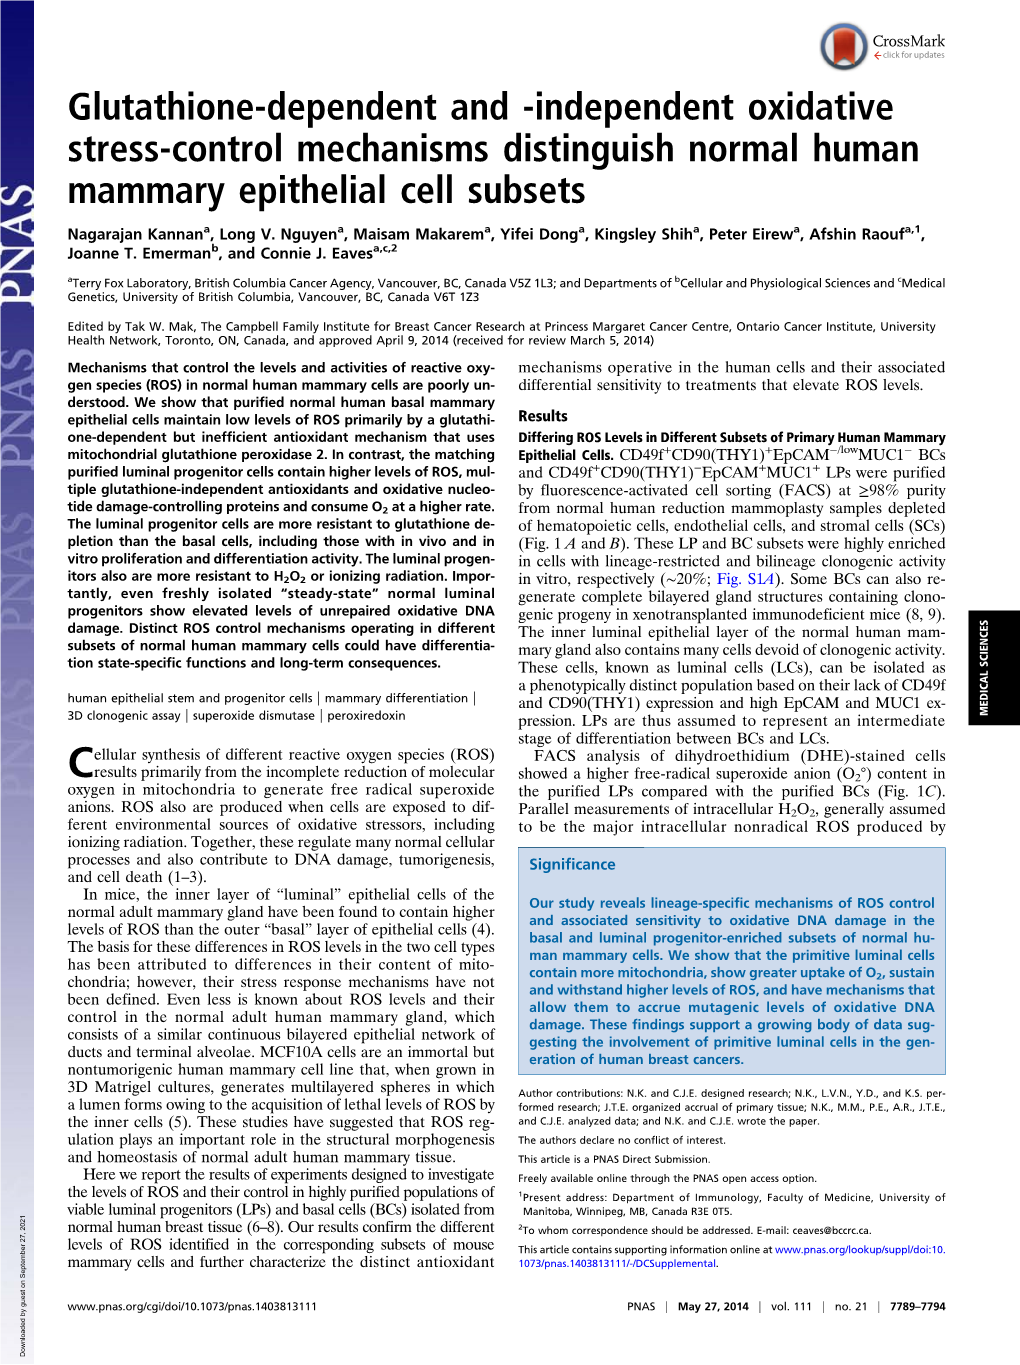 Glutathione-Dependent and -Independent Oxidative Stress-Control Mechanisms Distinguish Normal Human Mammary Epithelial Cell Subsets